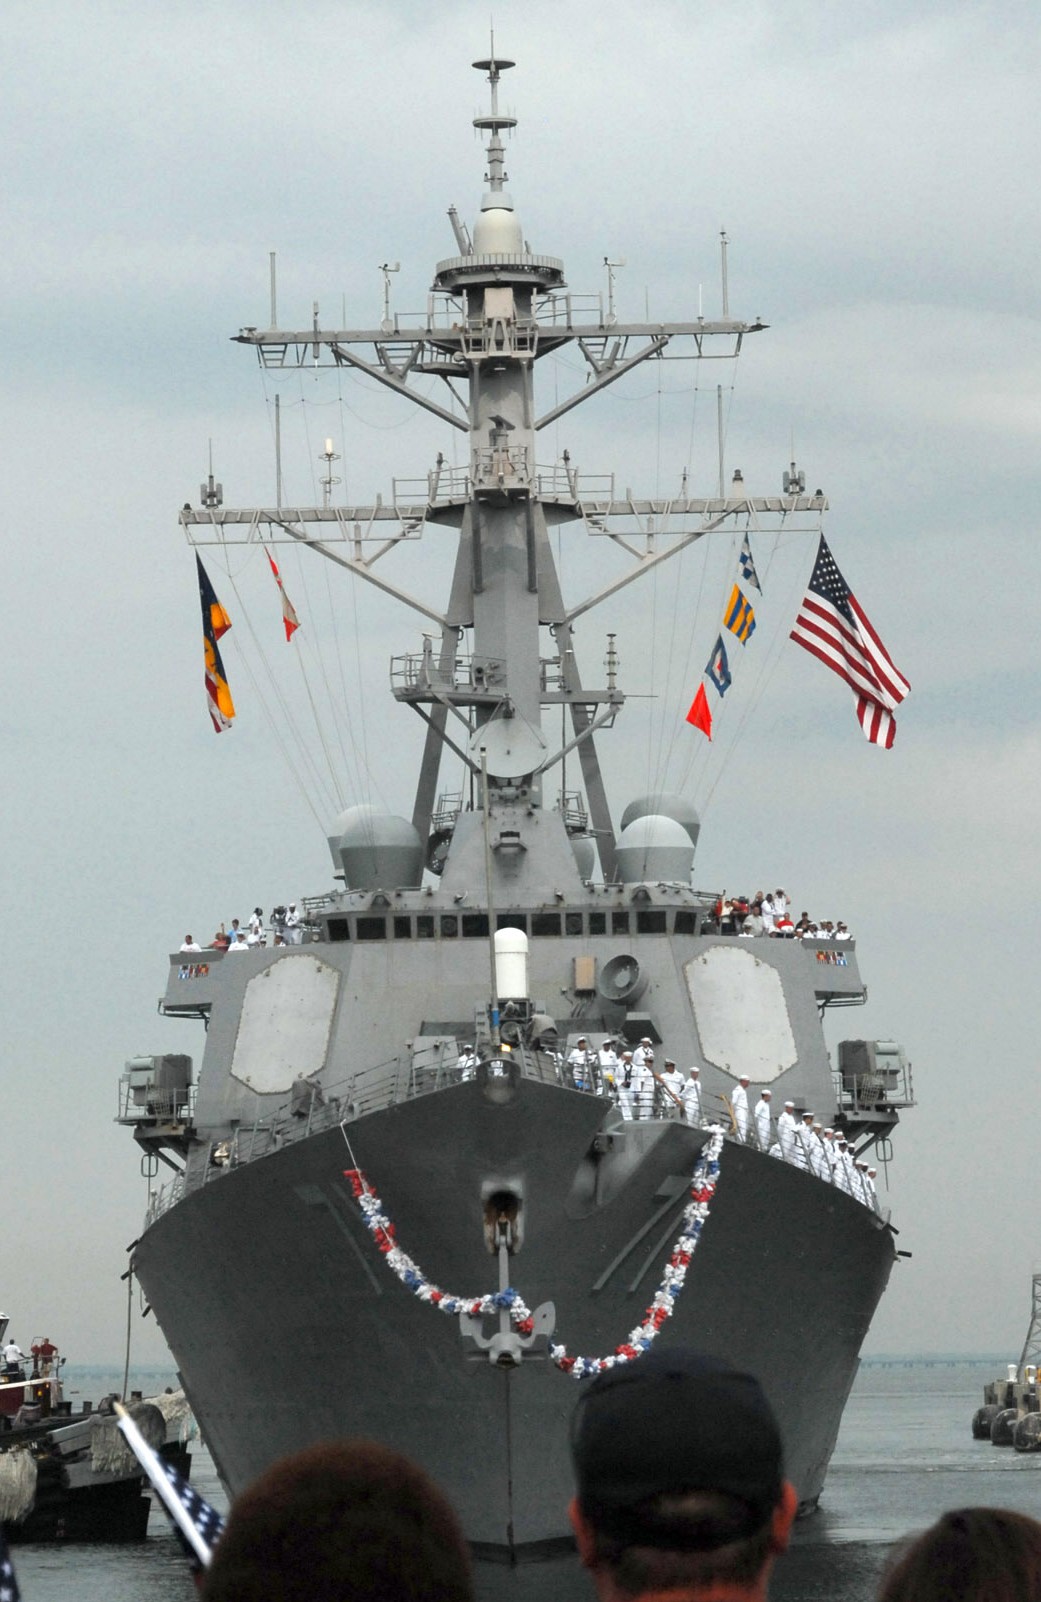 ddg-71 uss ross guided missile destroyer arleigh burke class aegis bmd 82